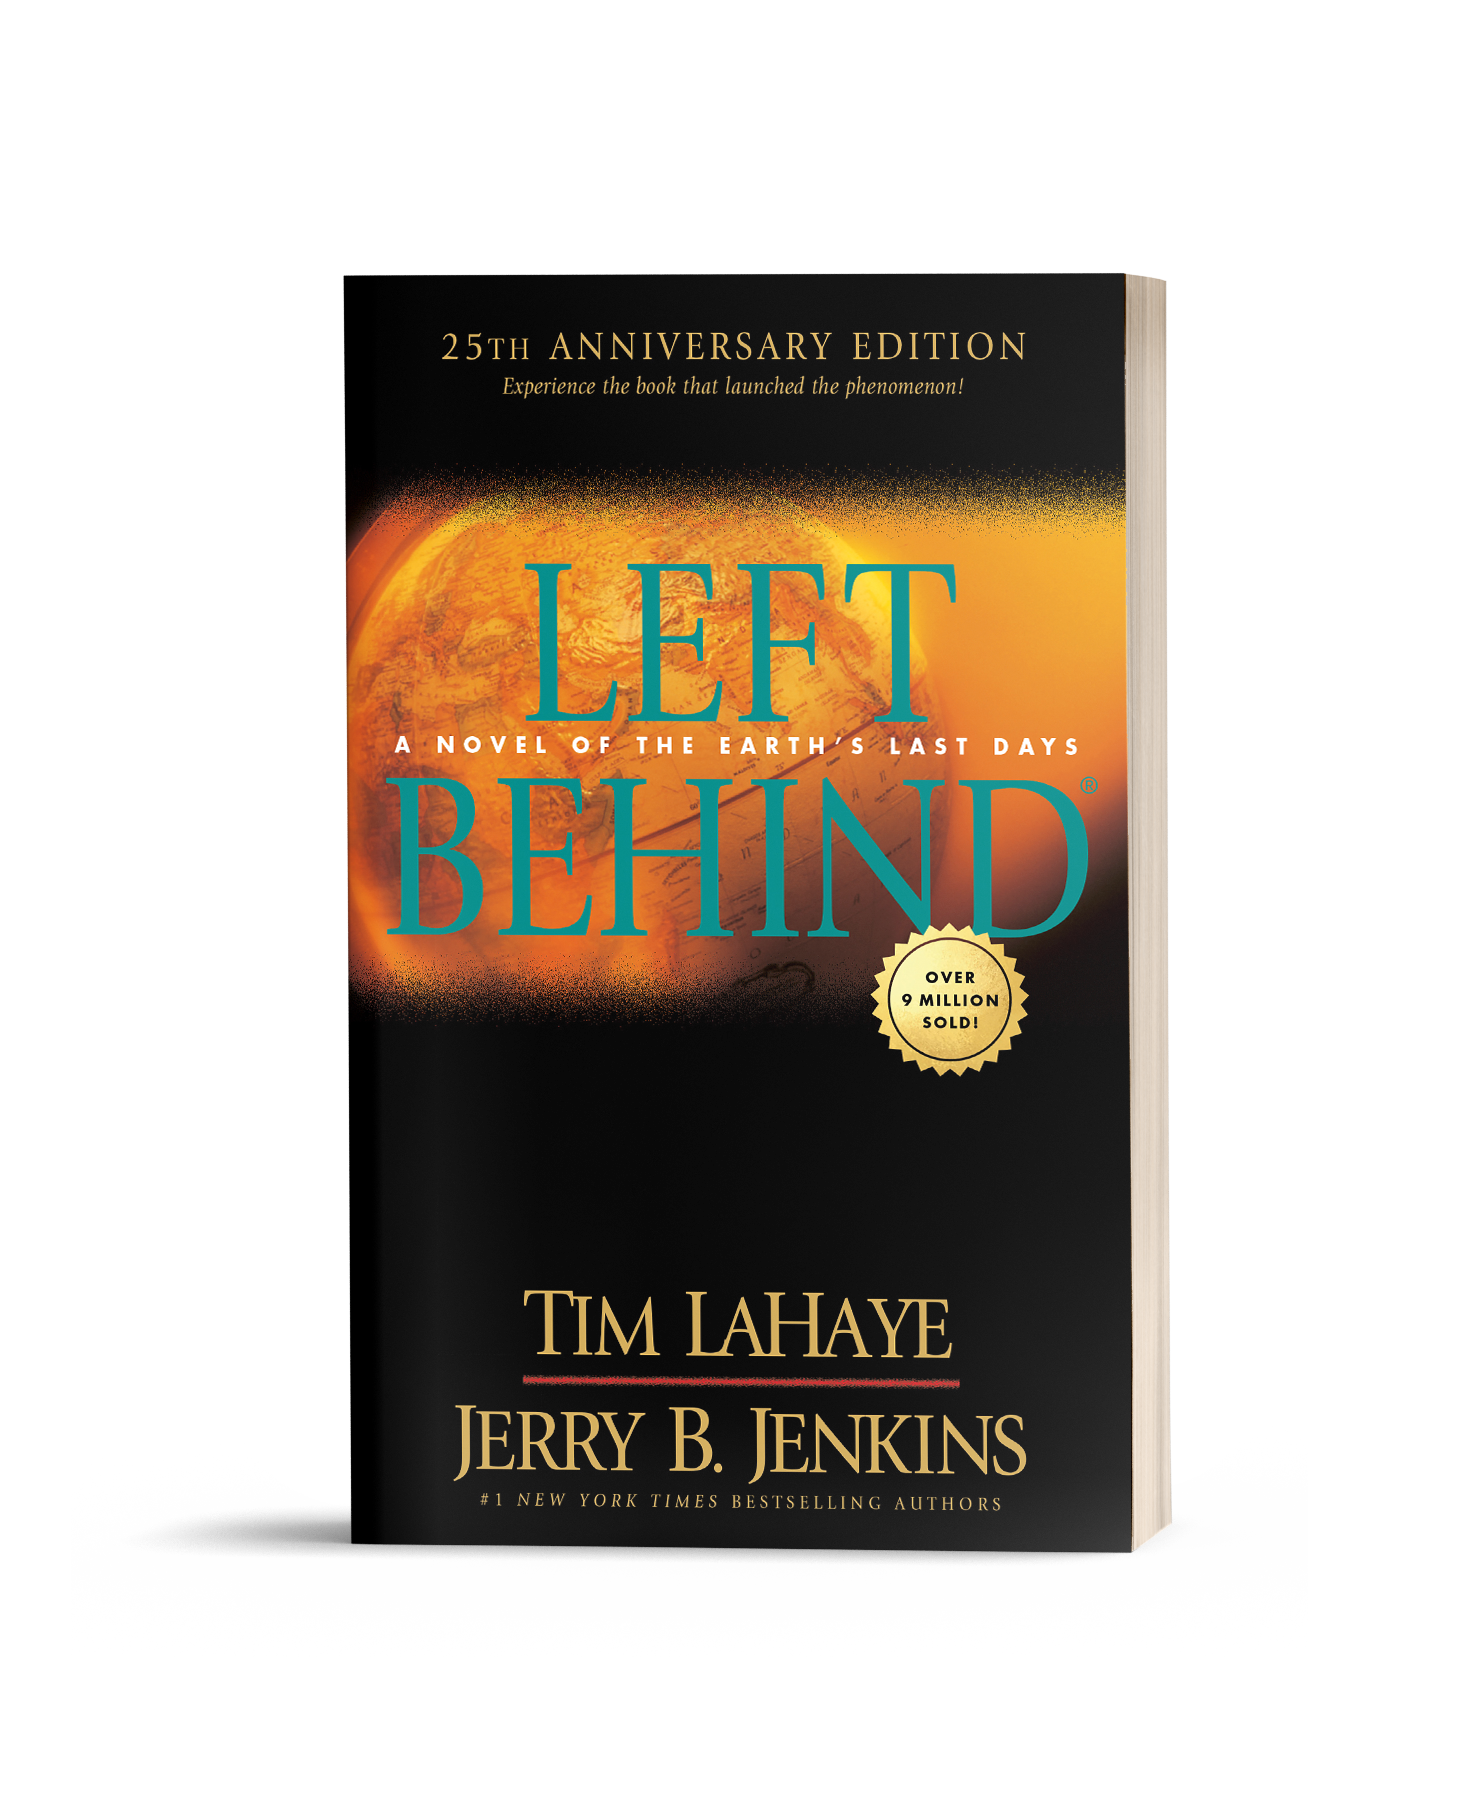 The 25th anniversary edition of the blockbuster, bestselling Christian fiction novel Left Behind by #1 New York Times bestselling authors Tim LaHaye and Jerry B. Jenkins